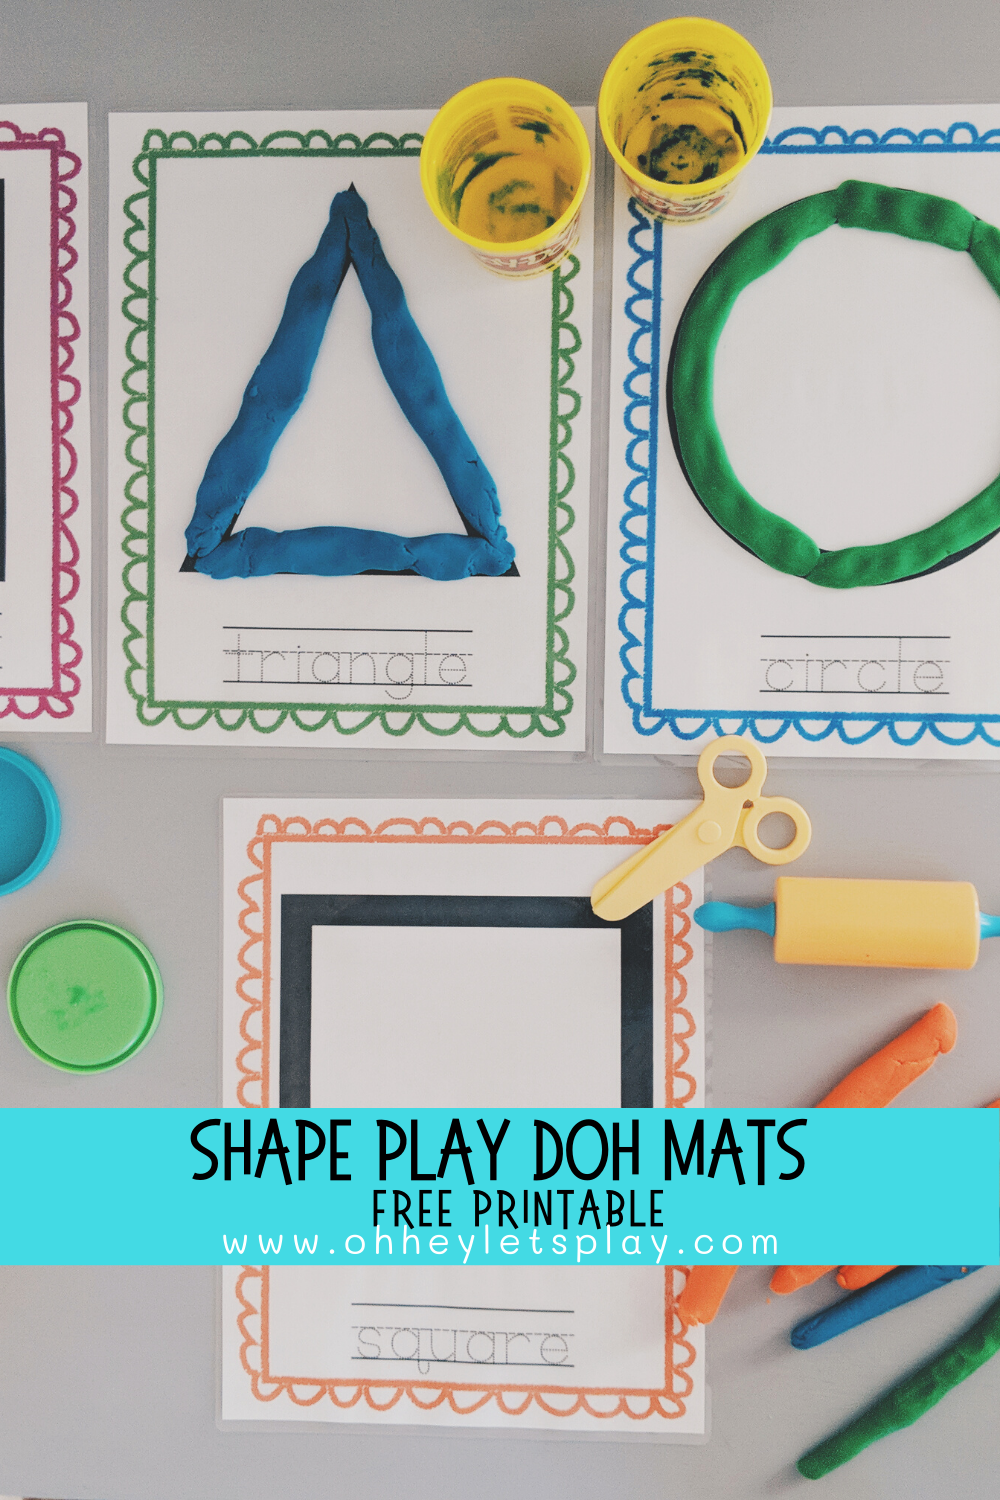 FREE SHAPES PLAY DOUGH MATS (Instant Download)  Shapes preschool,  Preschool learning, Preschool math